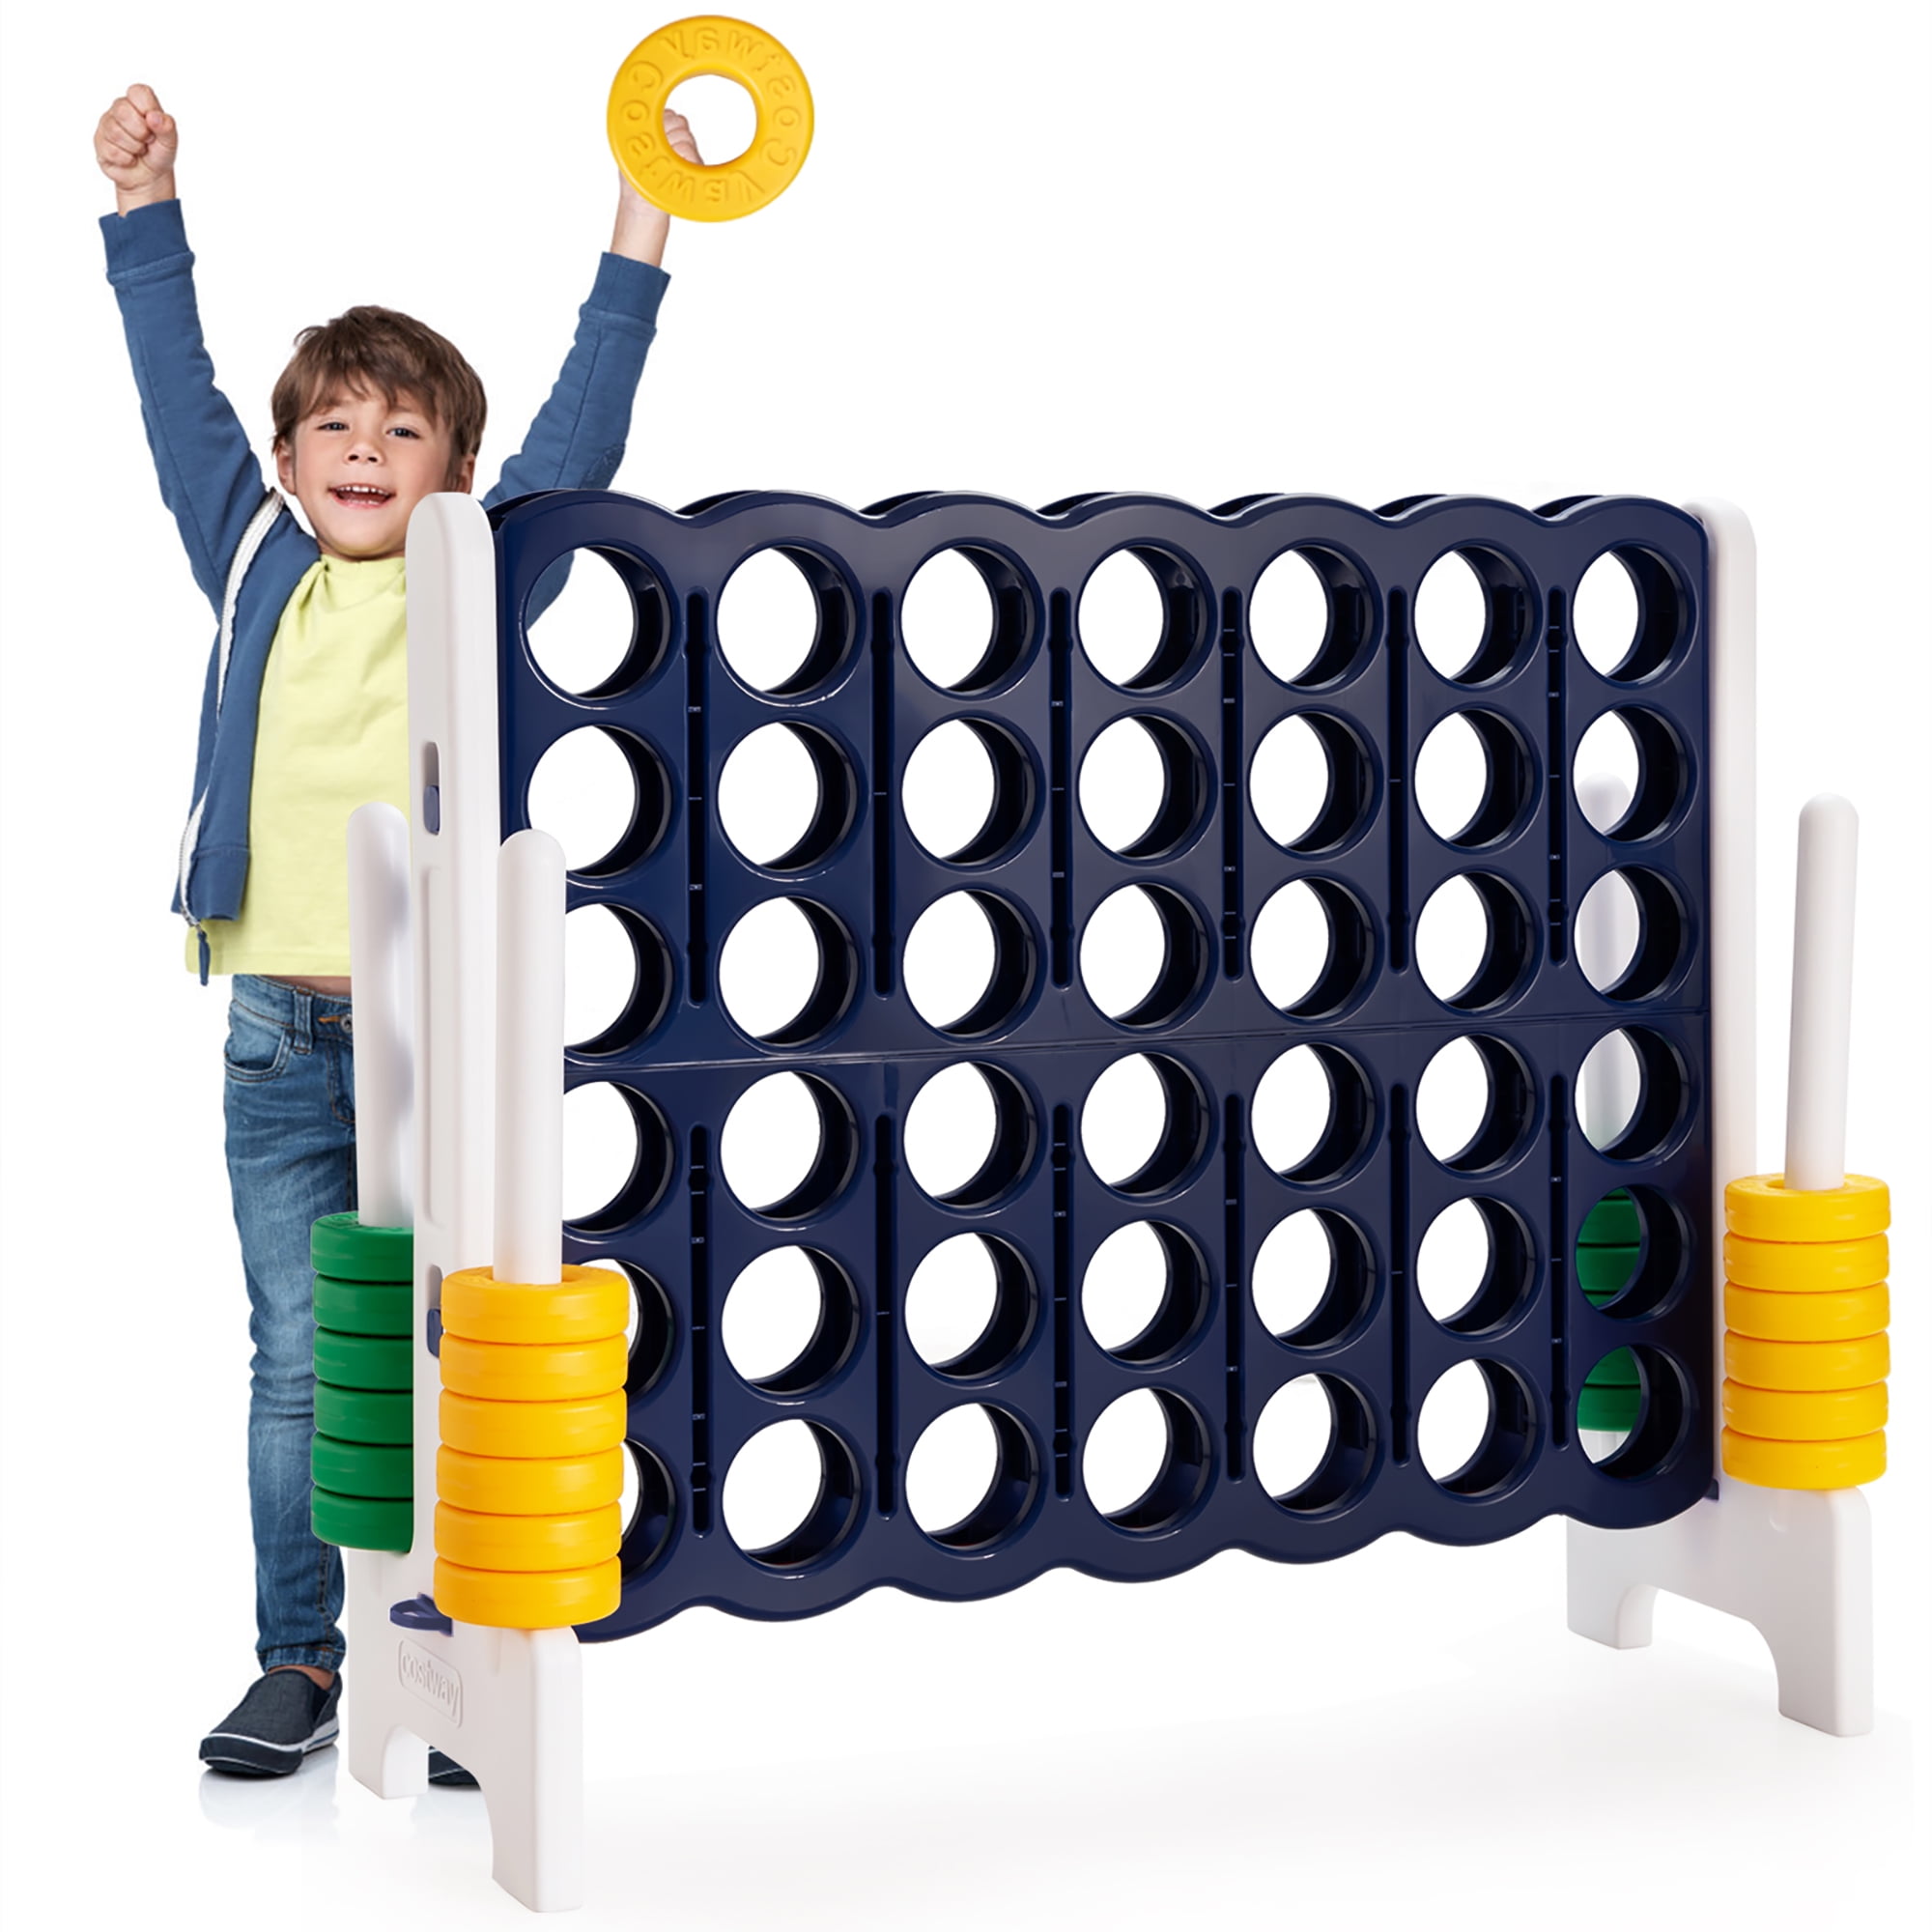 Details about   120cm Kids Jumbo 4-to-Score Giant Game Connect-All-4 Game Set Fun IndoorToy Blue 